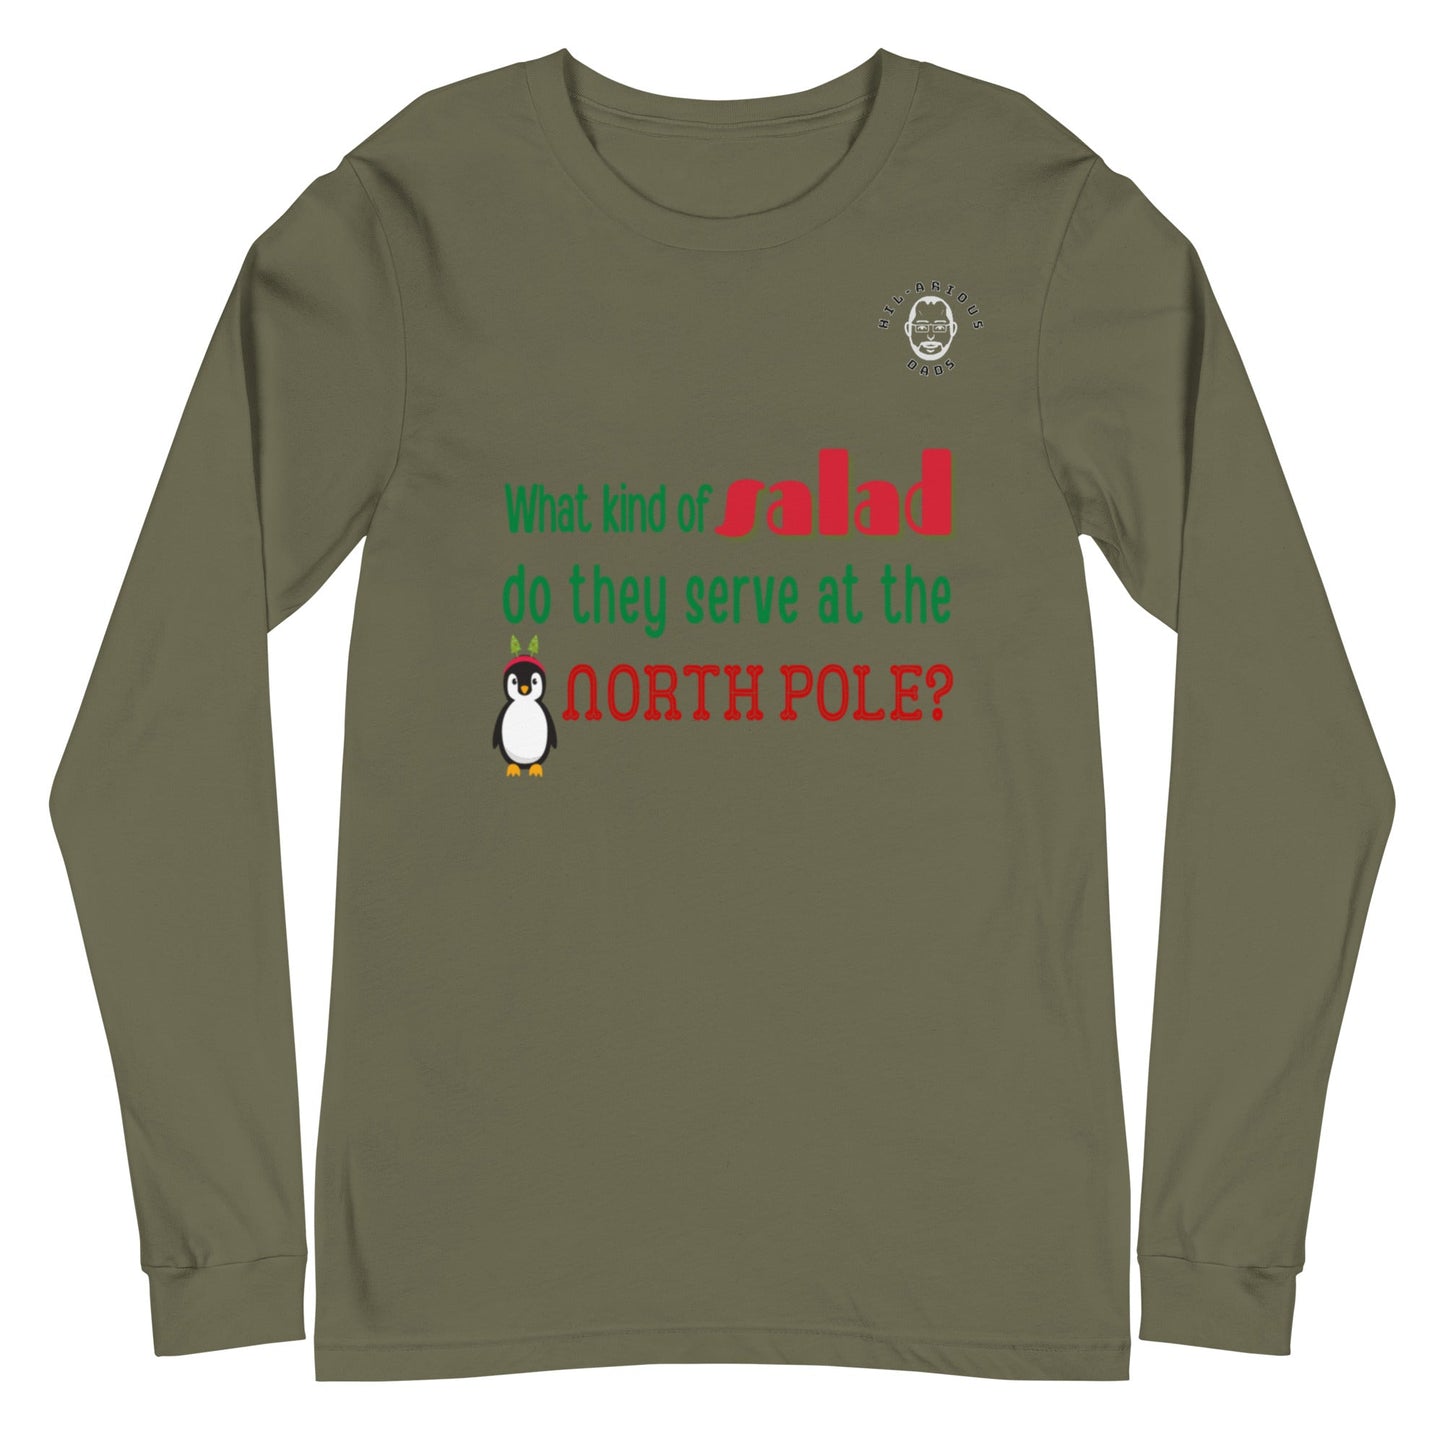 What kind of salad do they serve at the North Pole?-Long Sleeve Tee - Hil-arious Dads